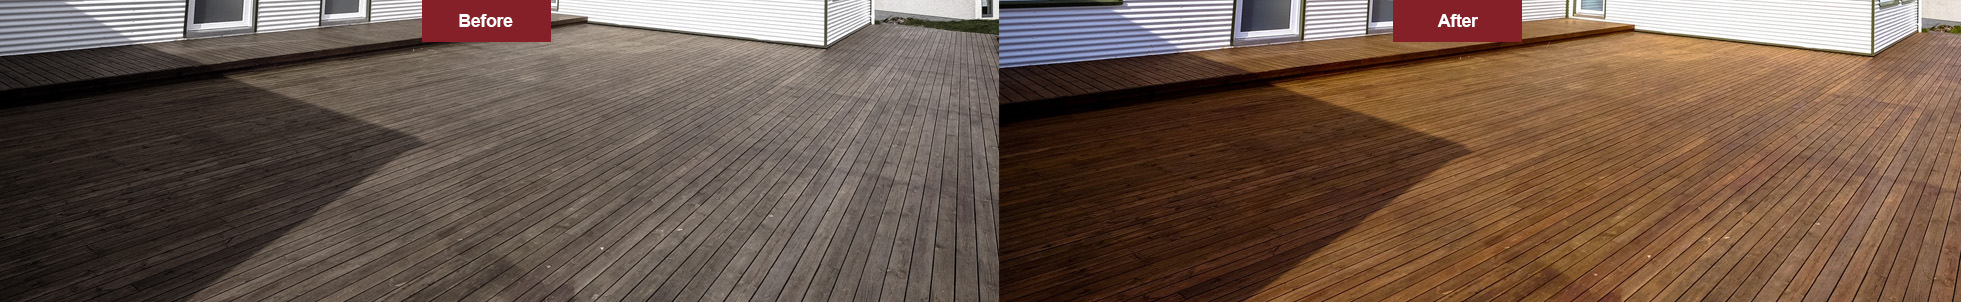 Deck restoration before and after